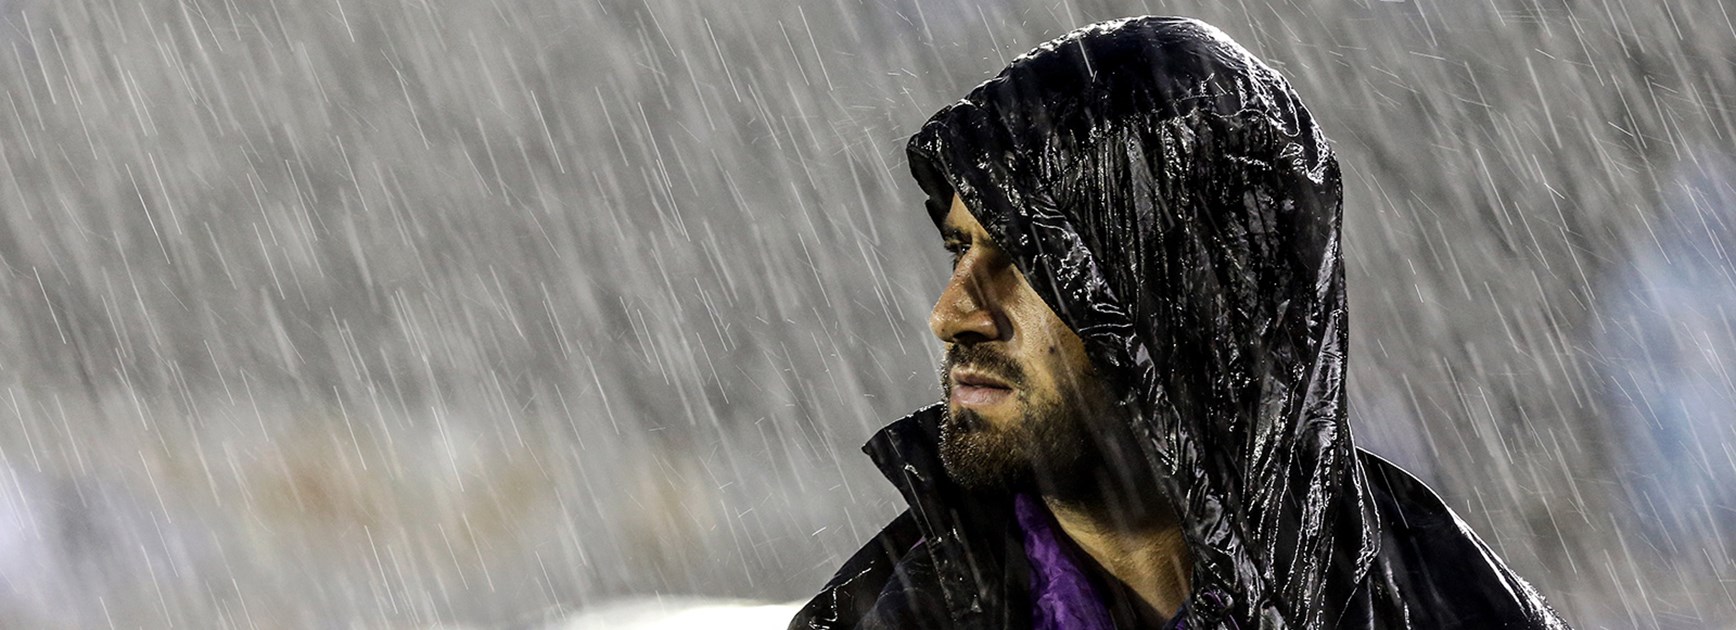 Melbourne Storm prop Jesse Bromwich suffered a thumb injury in Round 1 against the Bulldogs at Belmore.